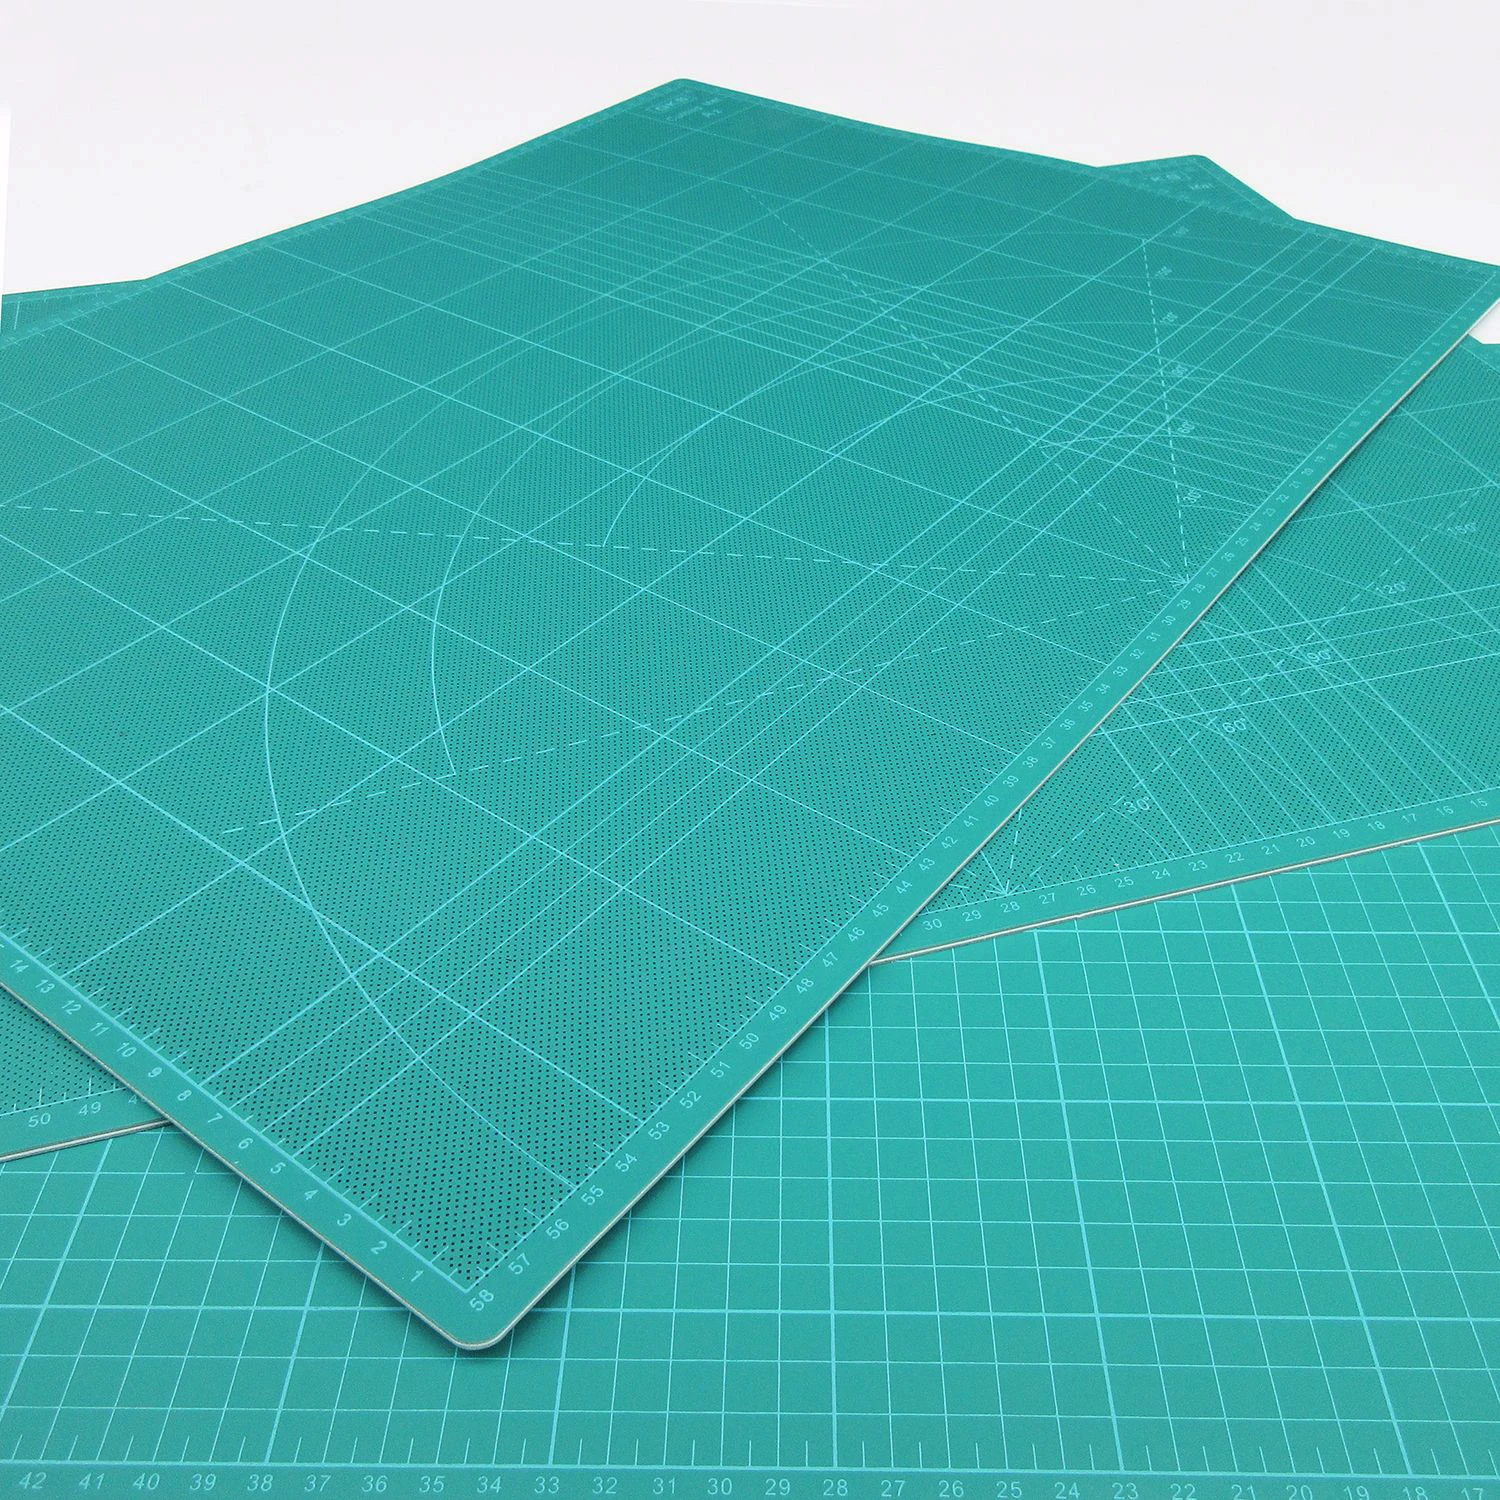 
Ready to ship Felaxtive Self Healing Curring Mat for PVC Rotary Safty Cutting Board Mat A3 